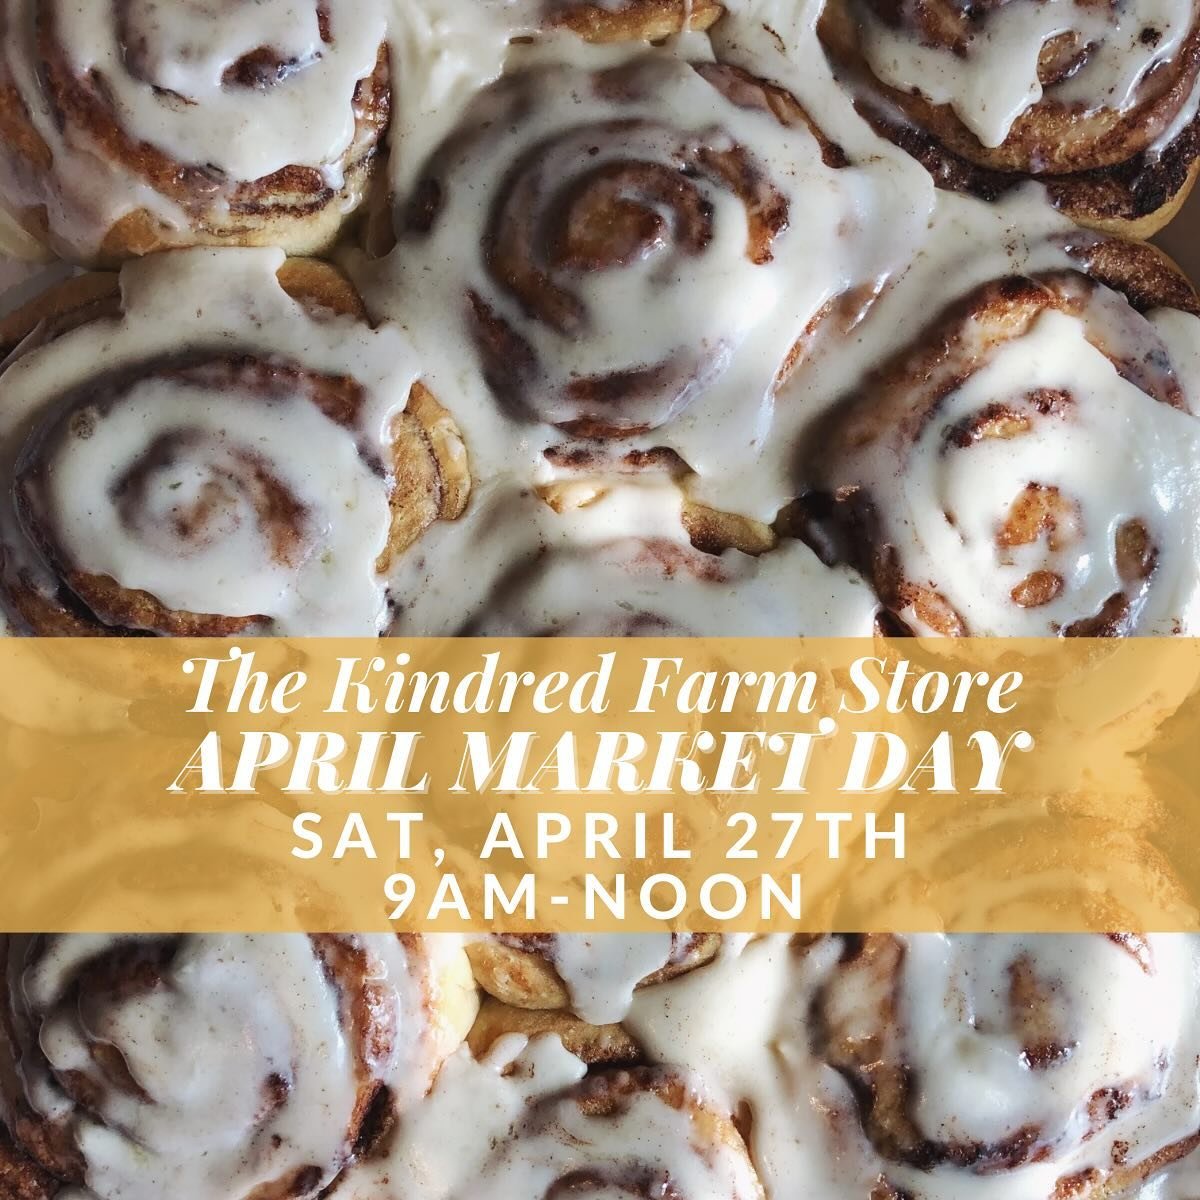 Who&rsquo;s craving some fresh, hot cinnamon rolls?! We&rsquo;re excited to open #thekindredfarmstore again this&nbsp;Saturday, April 27th&nbsp;from&nbsp;9am-noon!

We&rsquo;re also having a Starter Plant Sale this Saturday. 🌱 Come buy some starter 